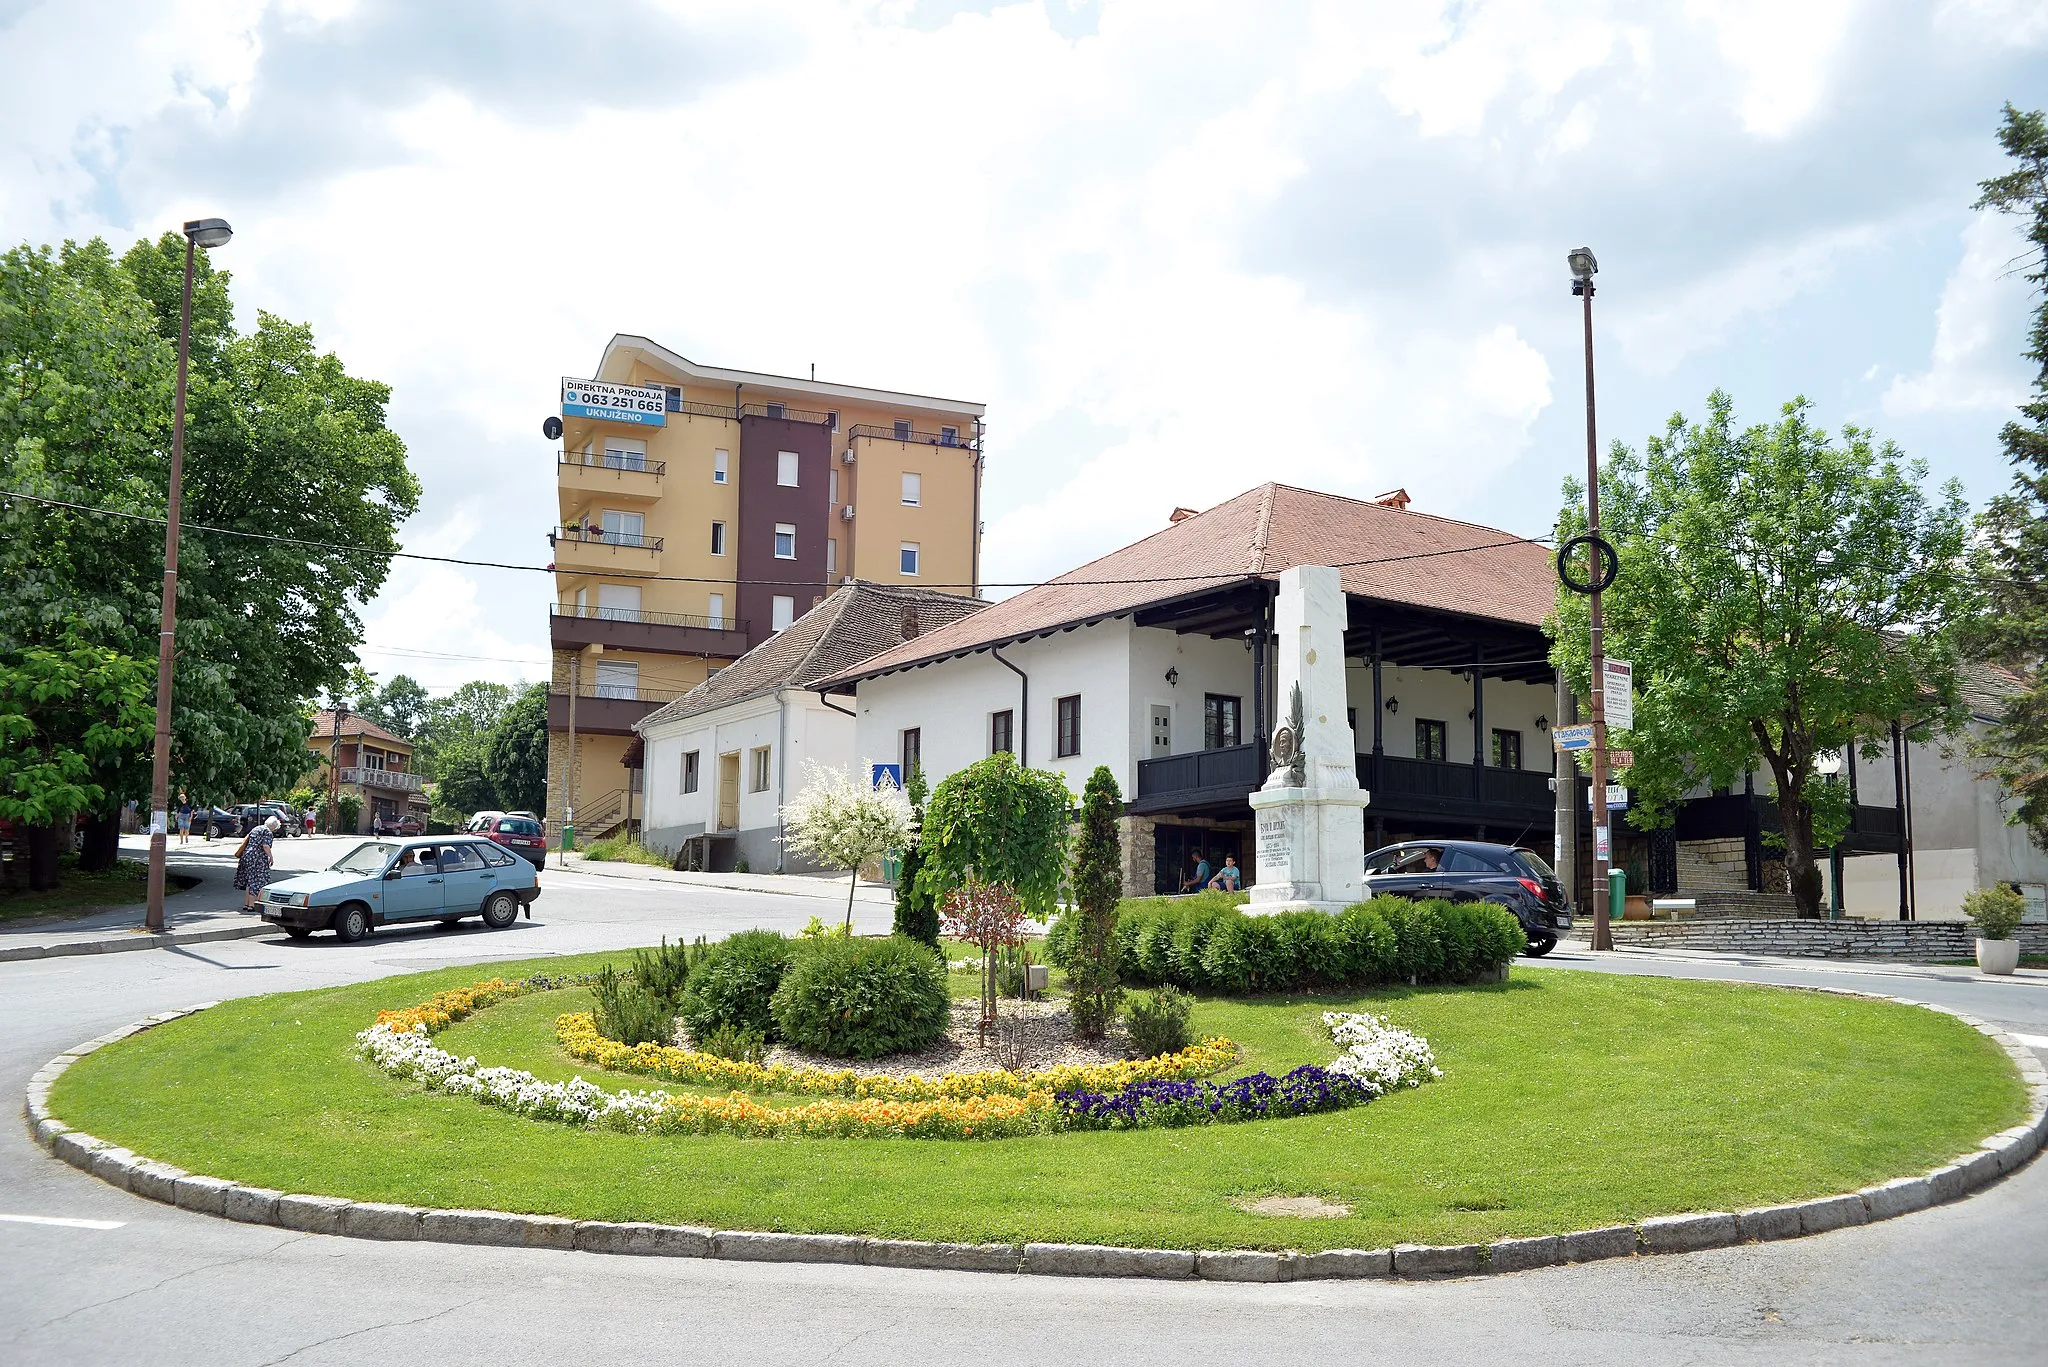 Photo showing: City center of Sopot,  a municipality of the city of Belgrade (Serbia) with monument to former deputy Djura Prokic (1873-1914), killed in the First World War